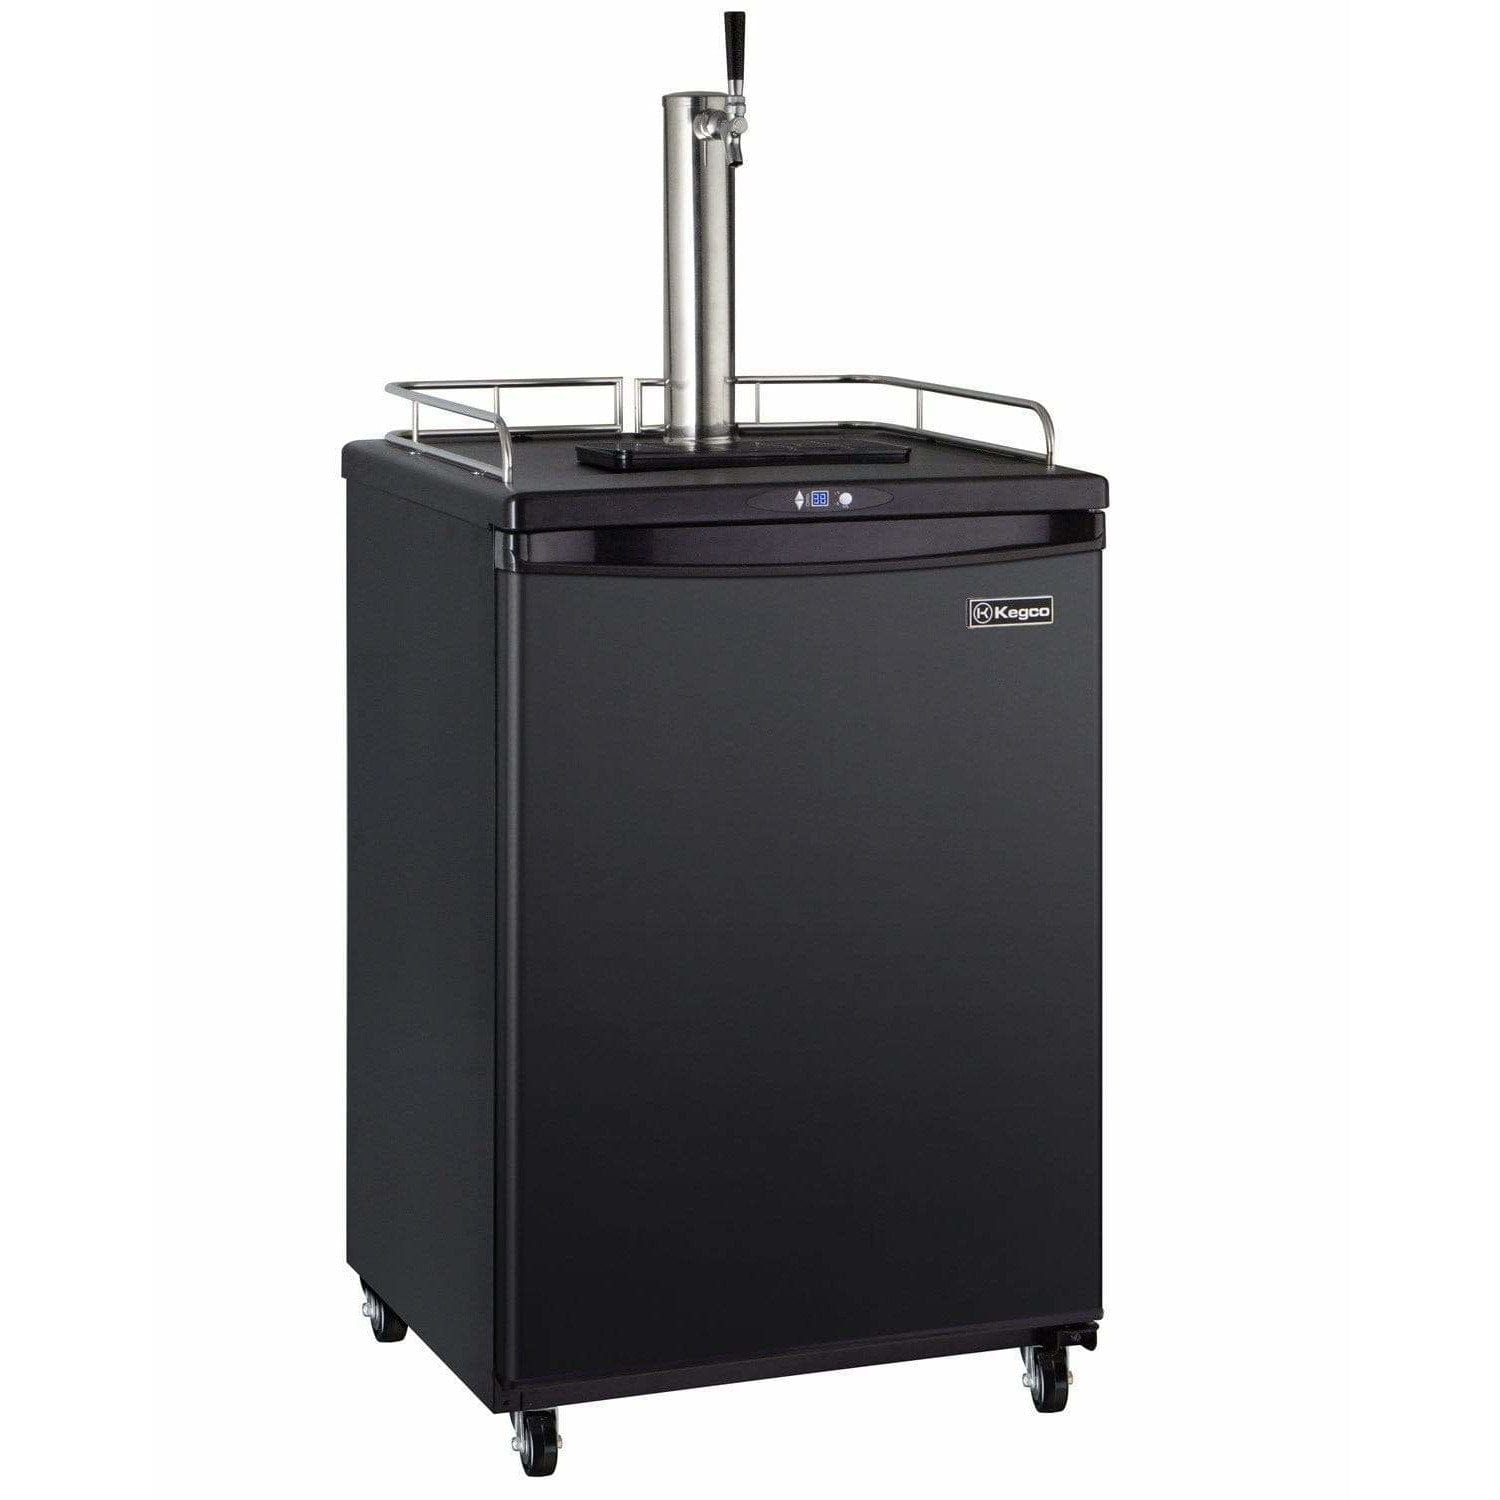 Kegco 24" Wide Cold Brew Coffee Single Tap Black Kegerator ICZ163B-1 Wine Coolers Empire